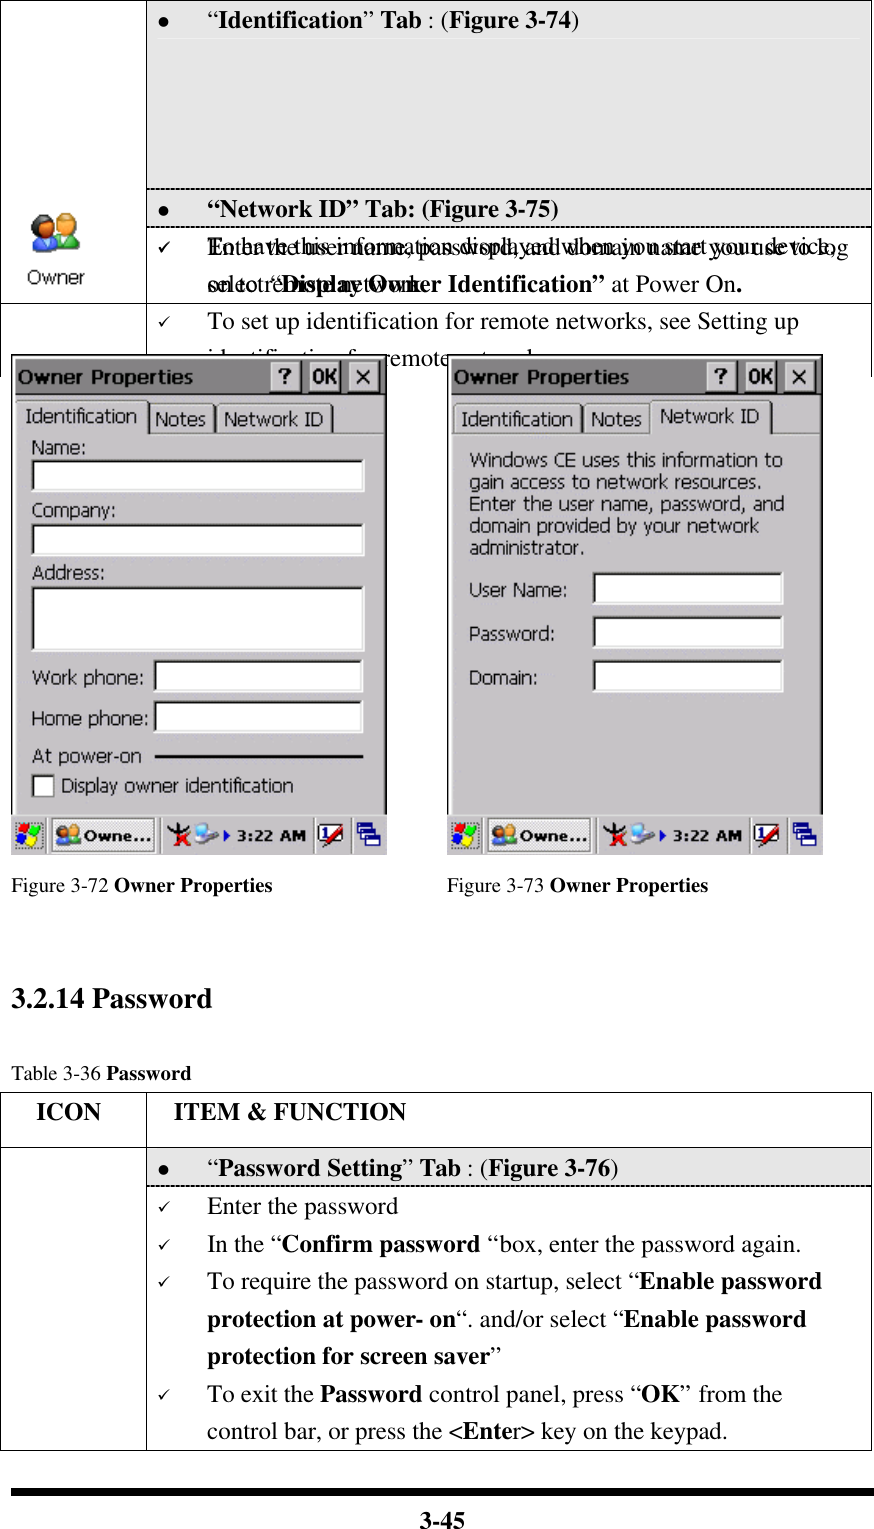  3-45 l “Identification” Tab : (Figure 3-74) ü Fill in or edit the data as desired. ü To have this information displayed when you start your device, select “Display Owner Identification” at Power On. ü To set up identification for remote networks, see Setting up identification for remote networks. l “Network ID” Tab: (Figure 3-75)  ü Enter the user name, password, and domain name you use to log on to remote network.     Figure 3-72 Owner Properties Figure 3-73 Owner Properties   3.2.14 Password    Table 3-36 Password   ICON  ITEM &amp; FUNCTION l “Password Setting” Tab : (Figure 3-76) ü Enter the password ü In the “Confirm password “box, enter the password again. ü To require the password on startup, select “Enable password protection at power- on“. and/or select “Enable password protection for screen saver” ü To exit the Password control panel, press “OK” from the control bar, or press the &lt;Enter&gt; key on the keypad. 